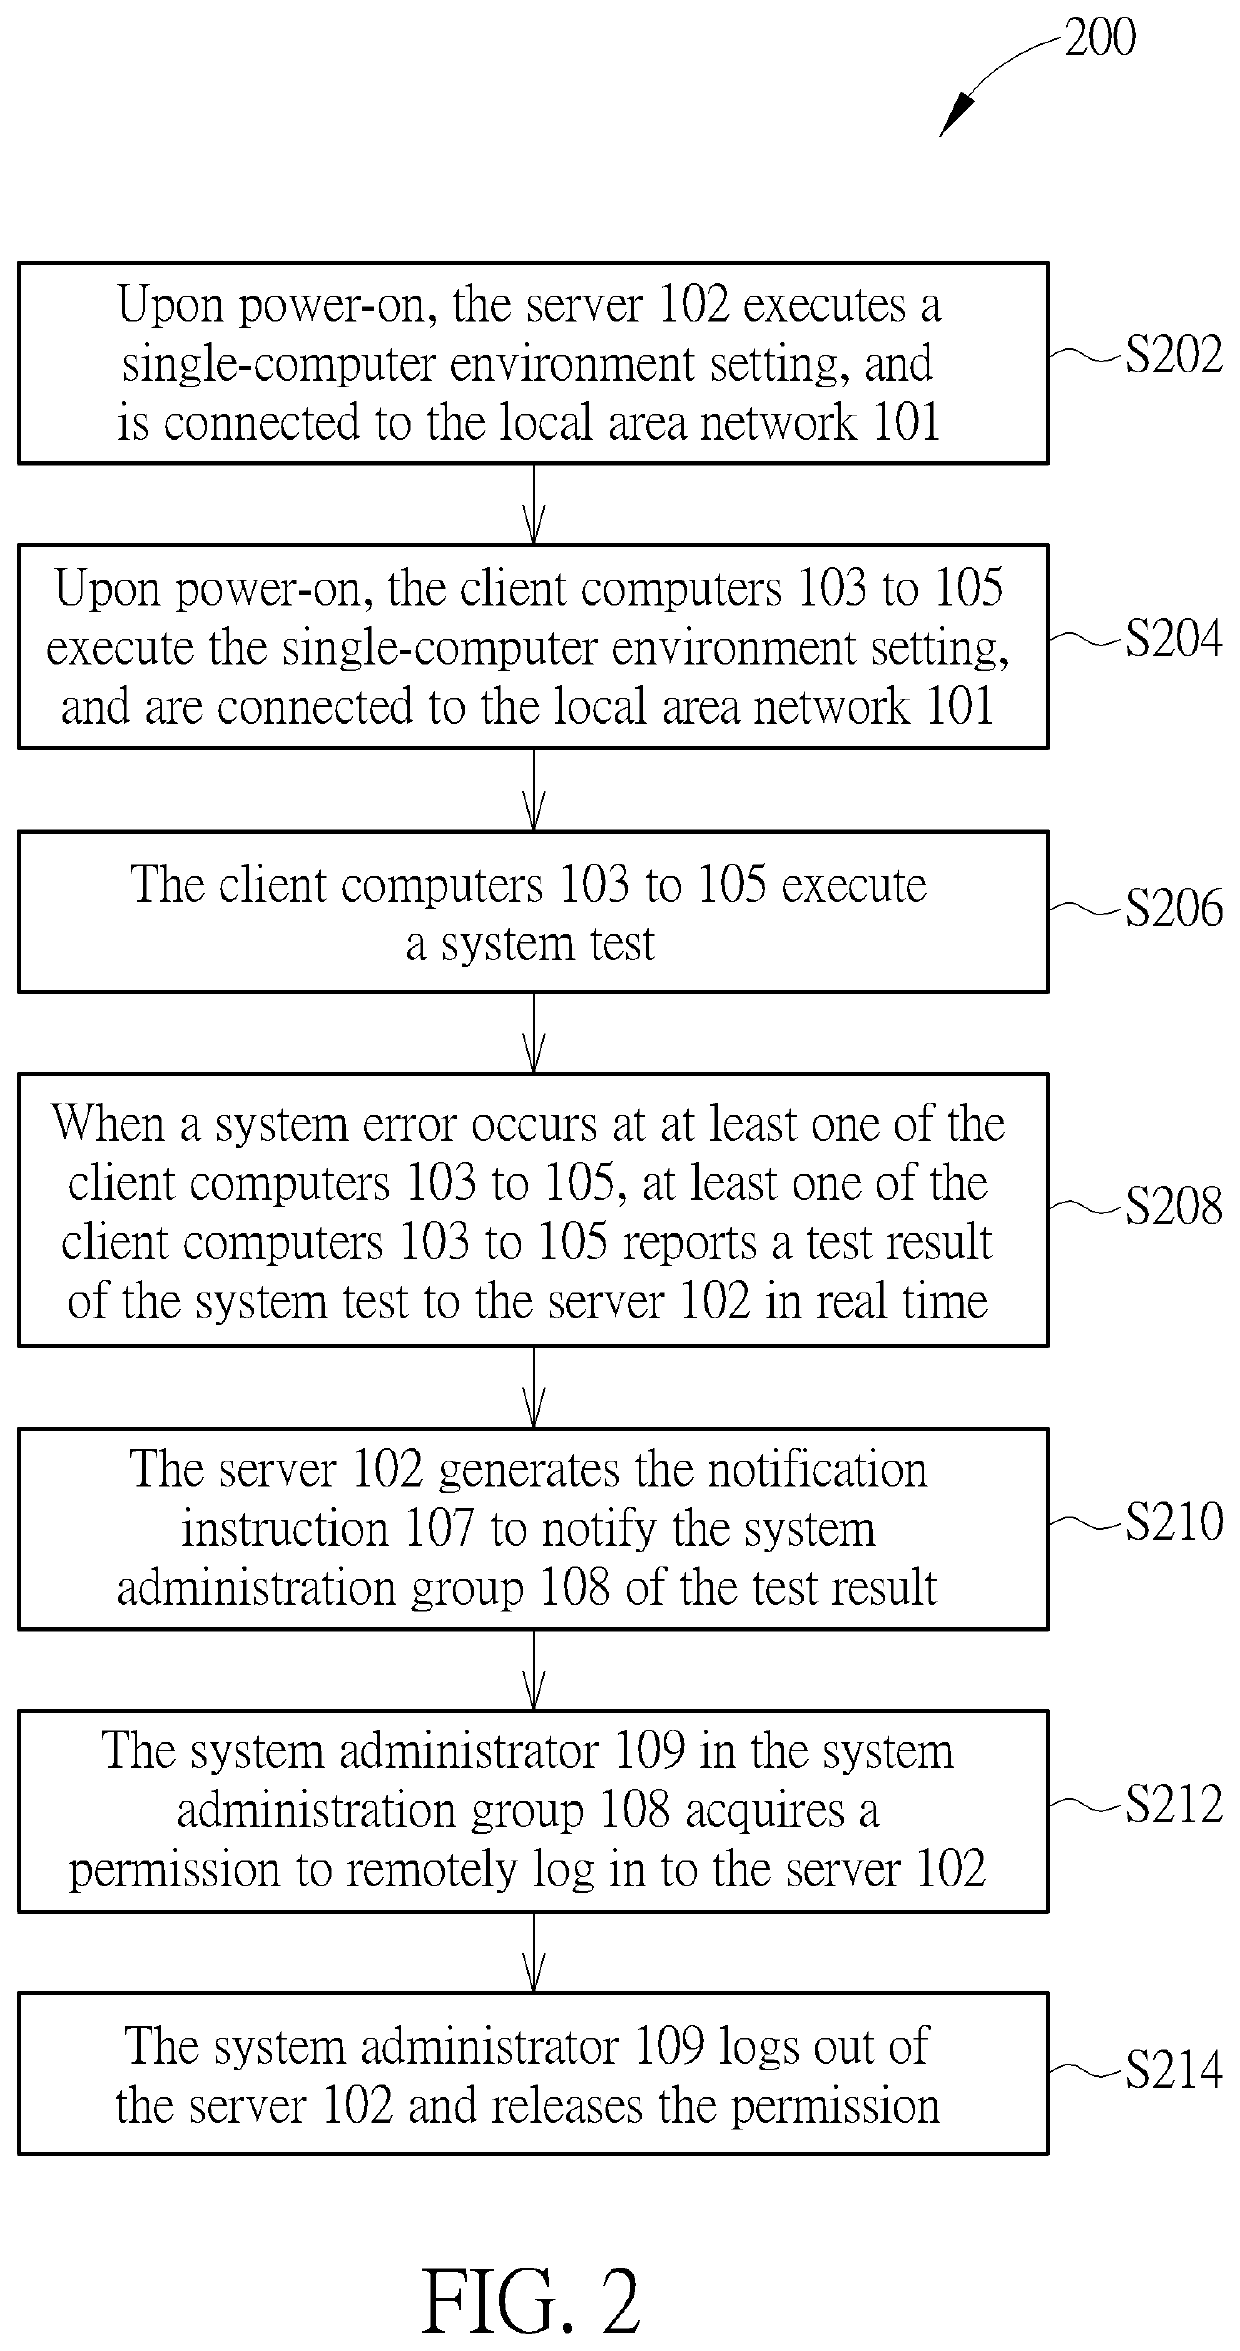 Testing Method of Reporting Test Results of Multiple Client Computers to Server and Testing System Utilizing Same